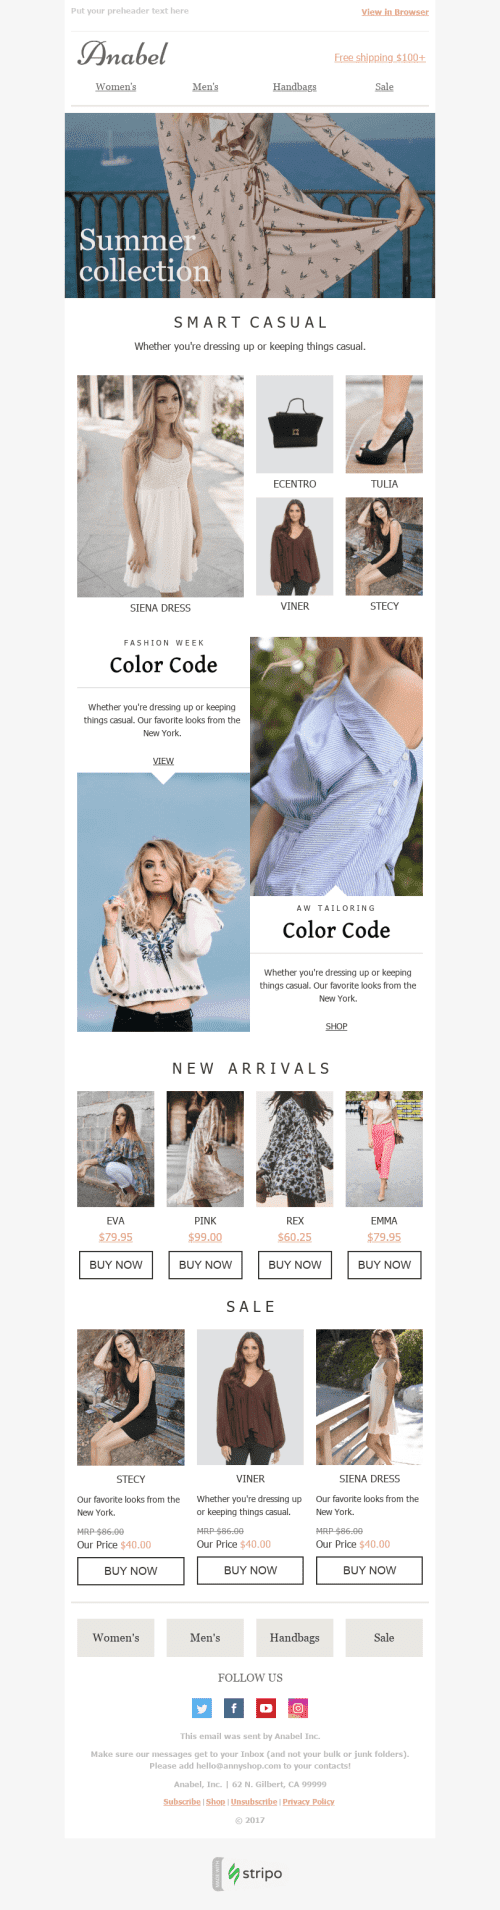 Promo Email Template "Bright Colors" for Fashion industry mobile view